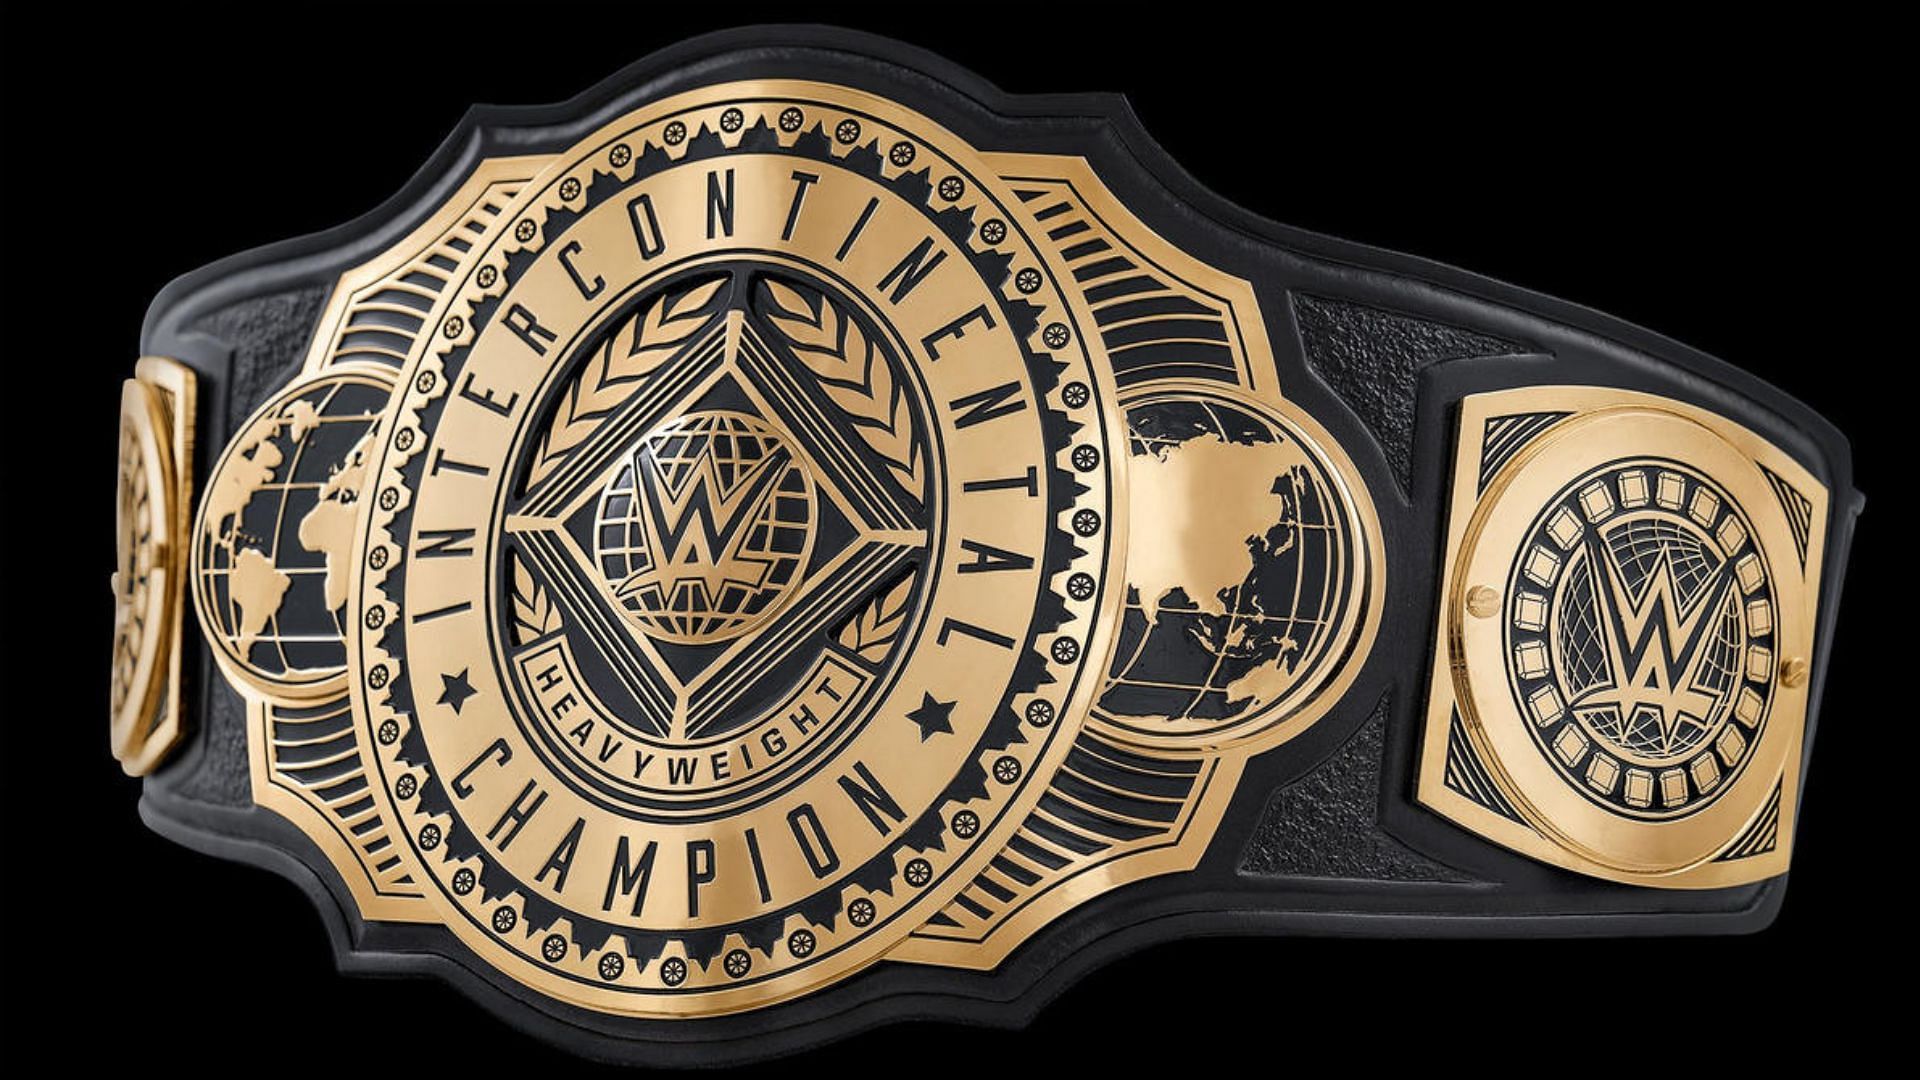 WWE introduced a new Intercontinental belt in 2019!